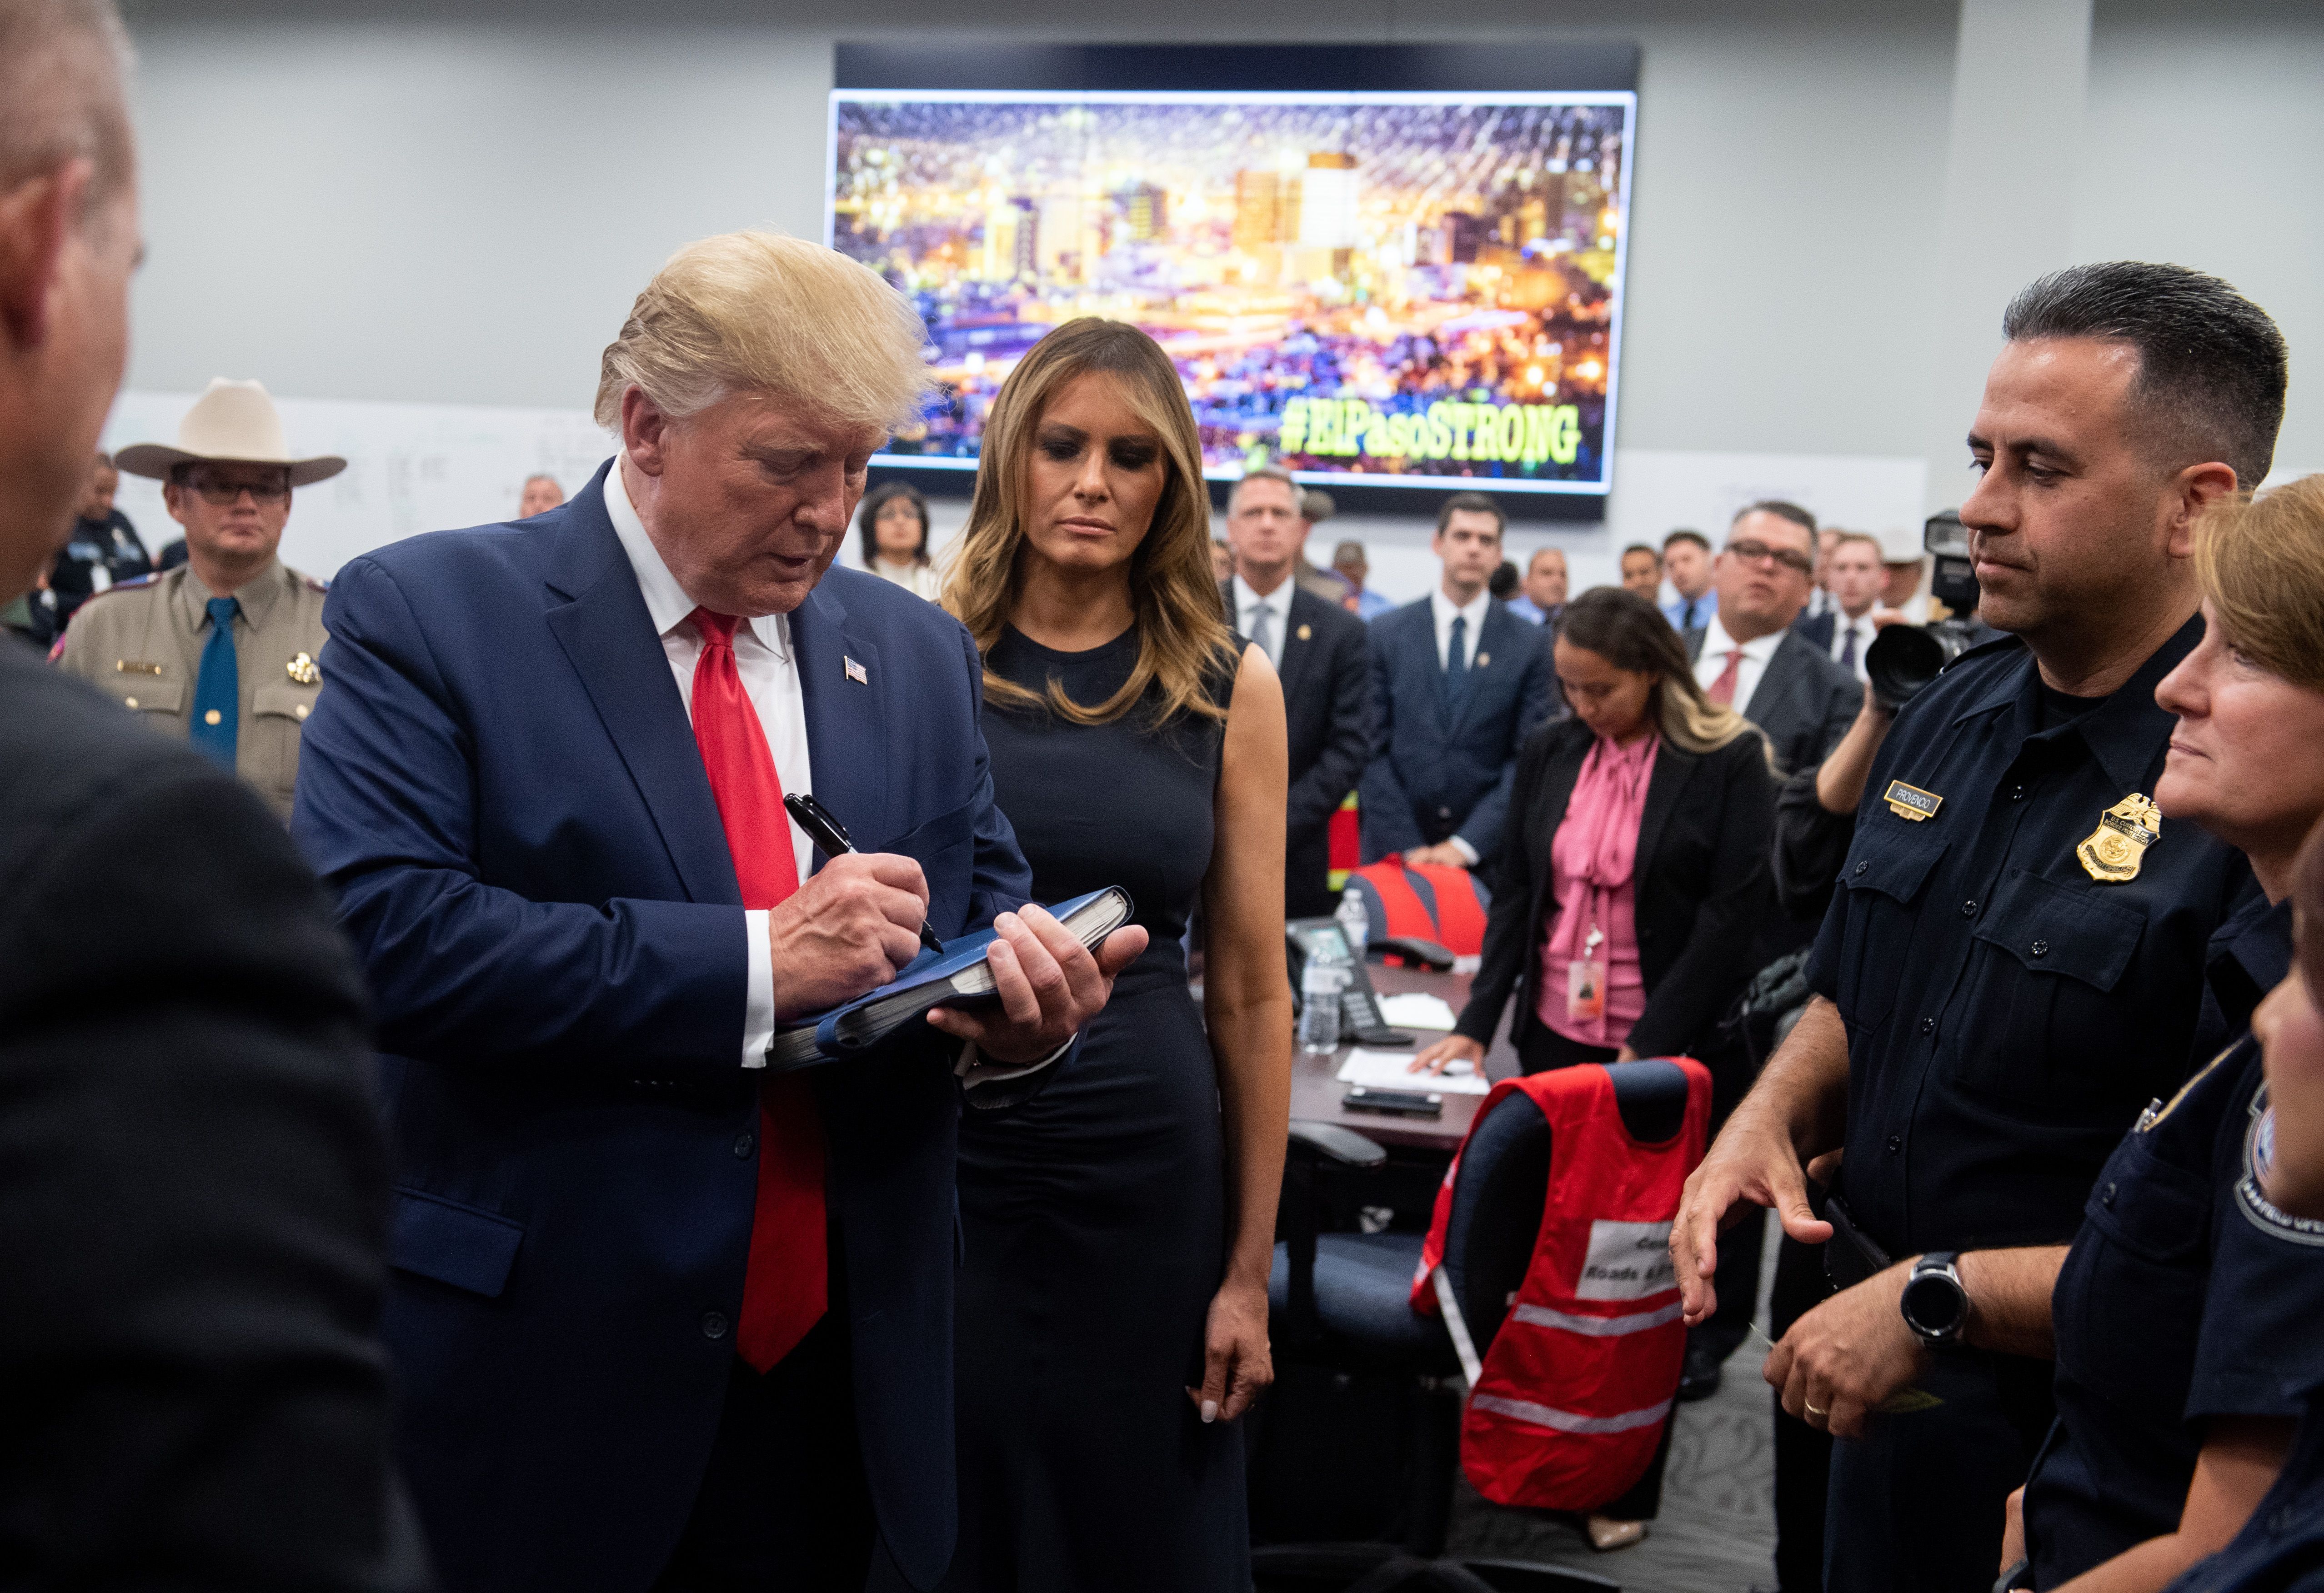  President Donald Trump and First Lady Melania Trump greet first responders as they visit El Paso)